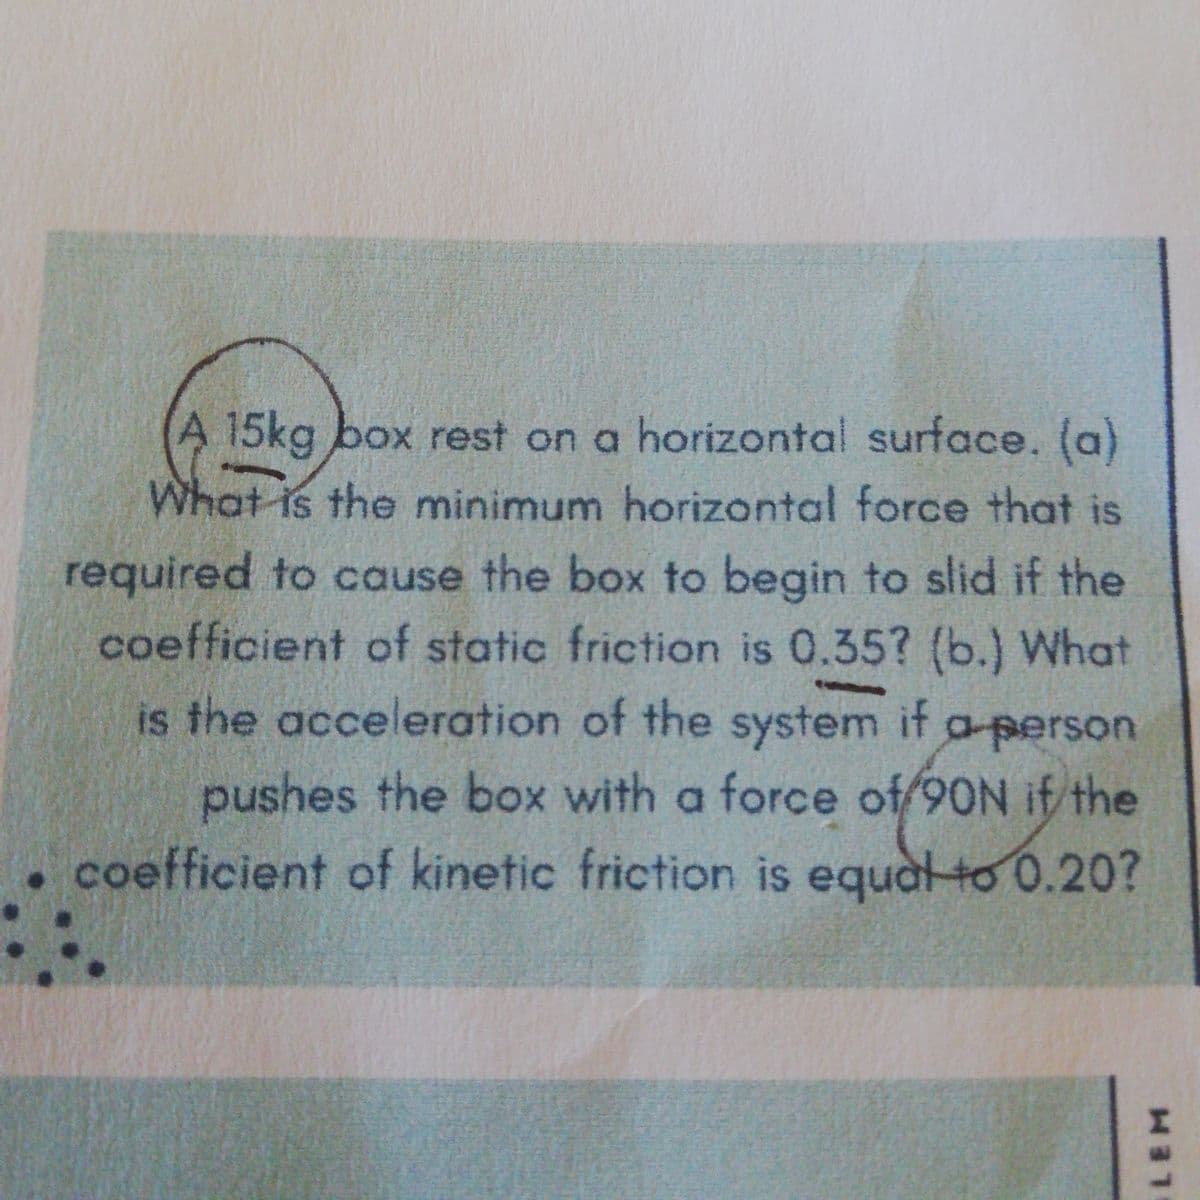 A 15kg box rest on a horizontal surface. (a)
What is the minimum horizontal force that is
required to cause the box to begin to slid if the
coefficient of static friction is 0.35? (b.) What
is the acceleration of the system if a person
pushes the box with a force of/90N if the
•coefficient of kinetic friction is equal to 0.20?
